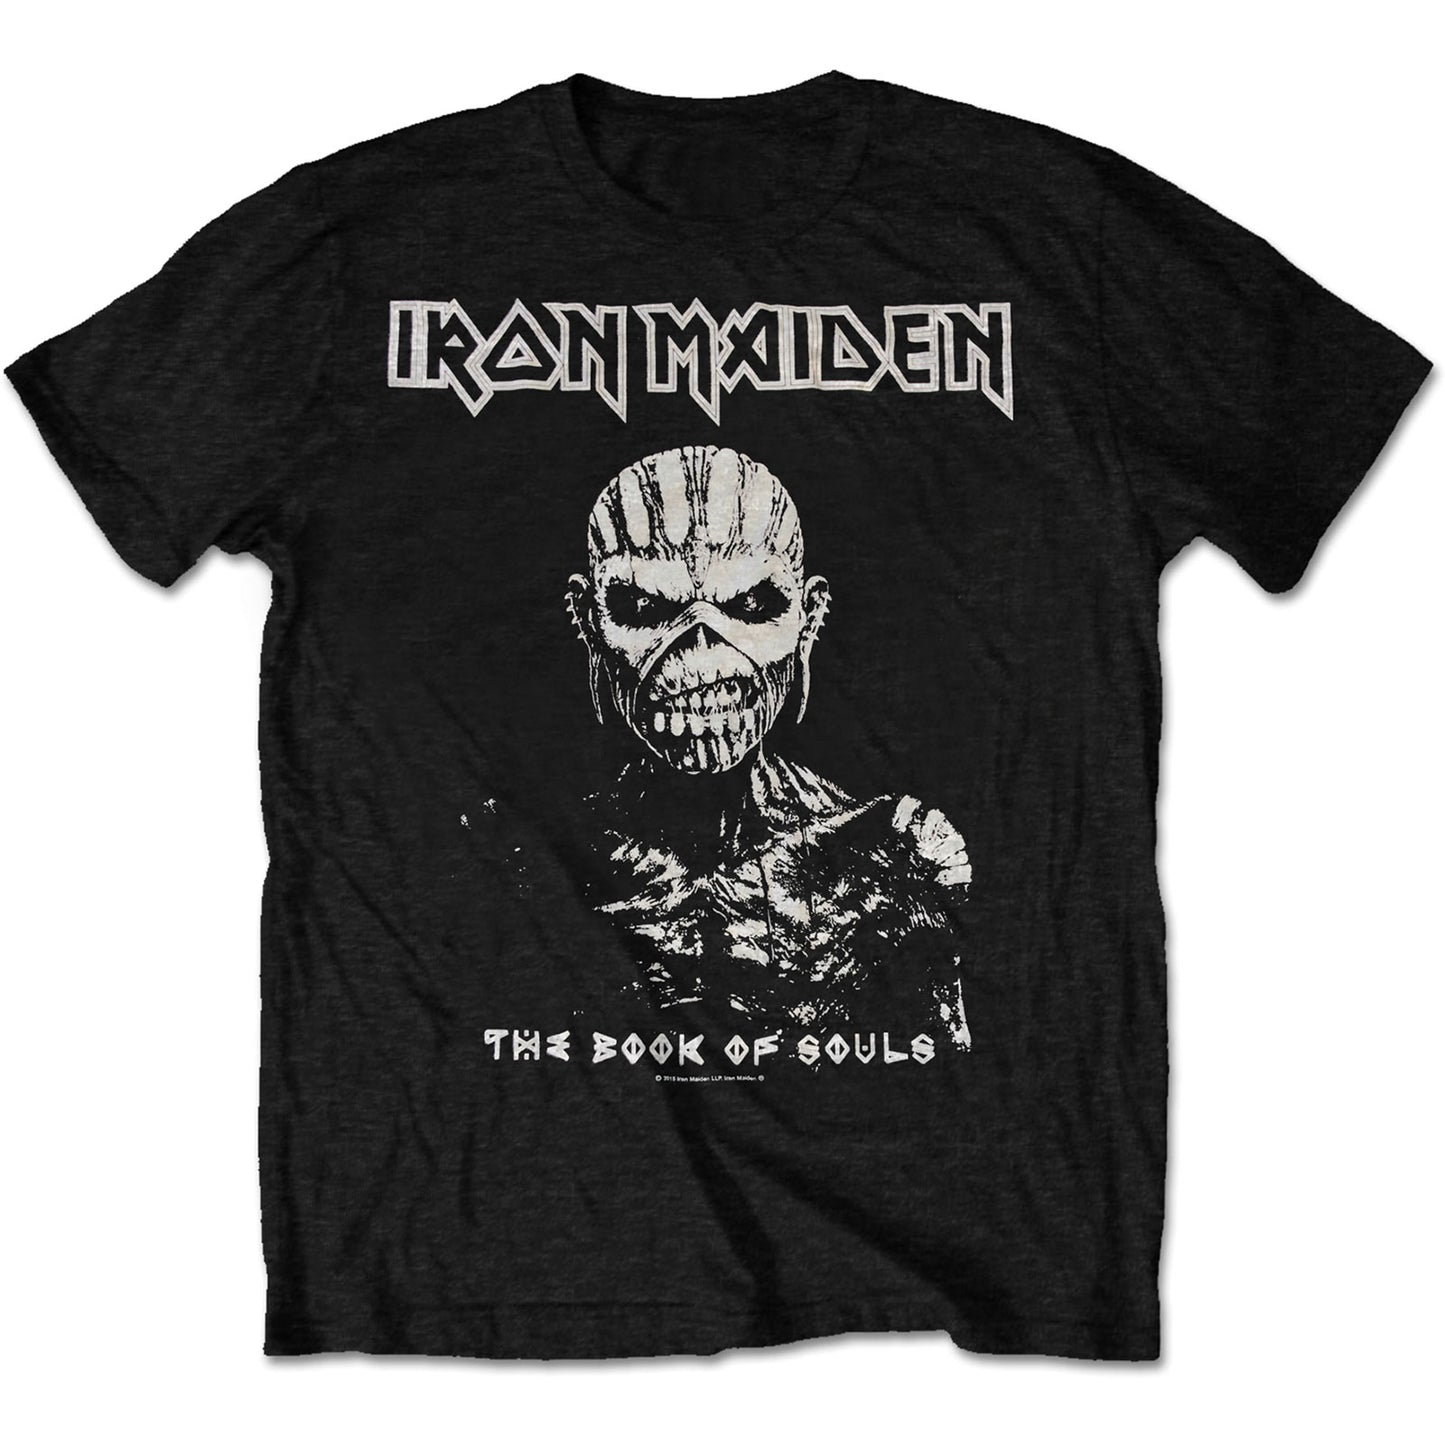 Iron Maiden T-Shirt: The Book of Souls White Contrast